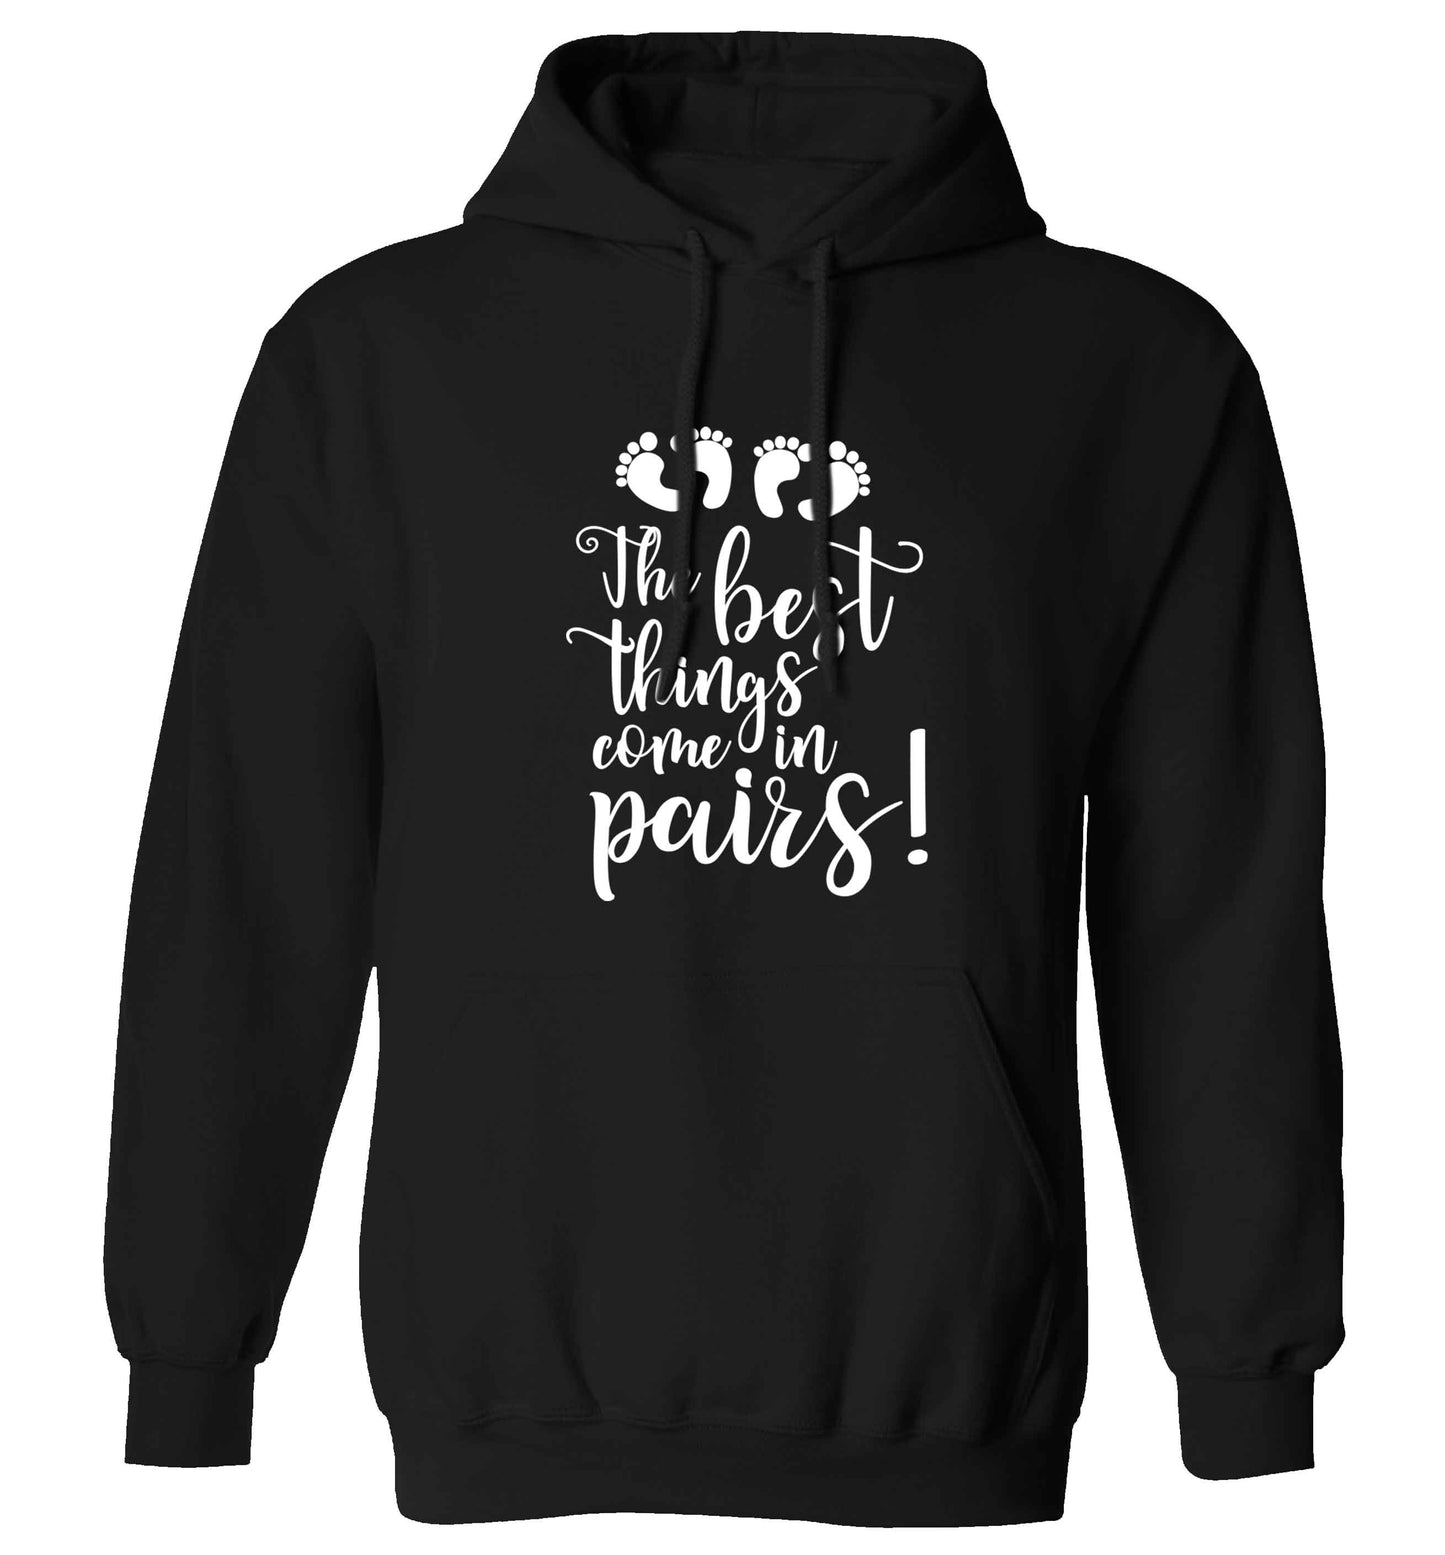 The best things come in pairs! adults unisex black hoodie 2XL